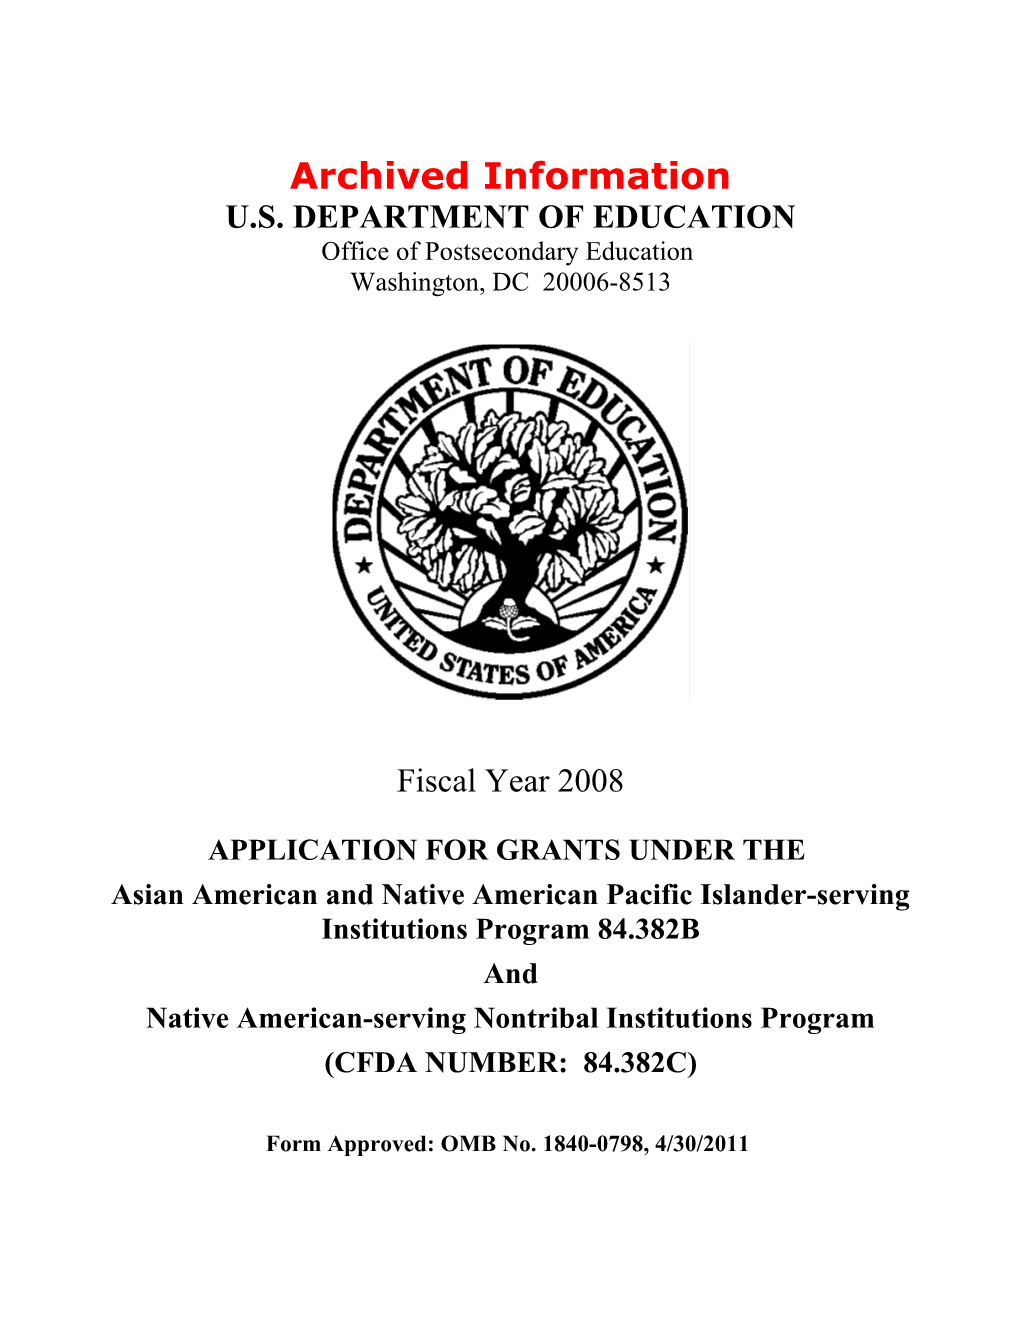 Archived: FY 2008 Application for the Asian American and Native American Pacific